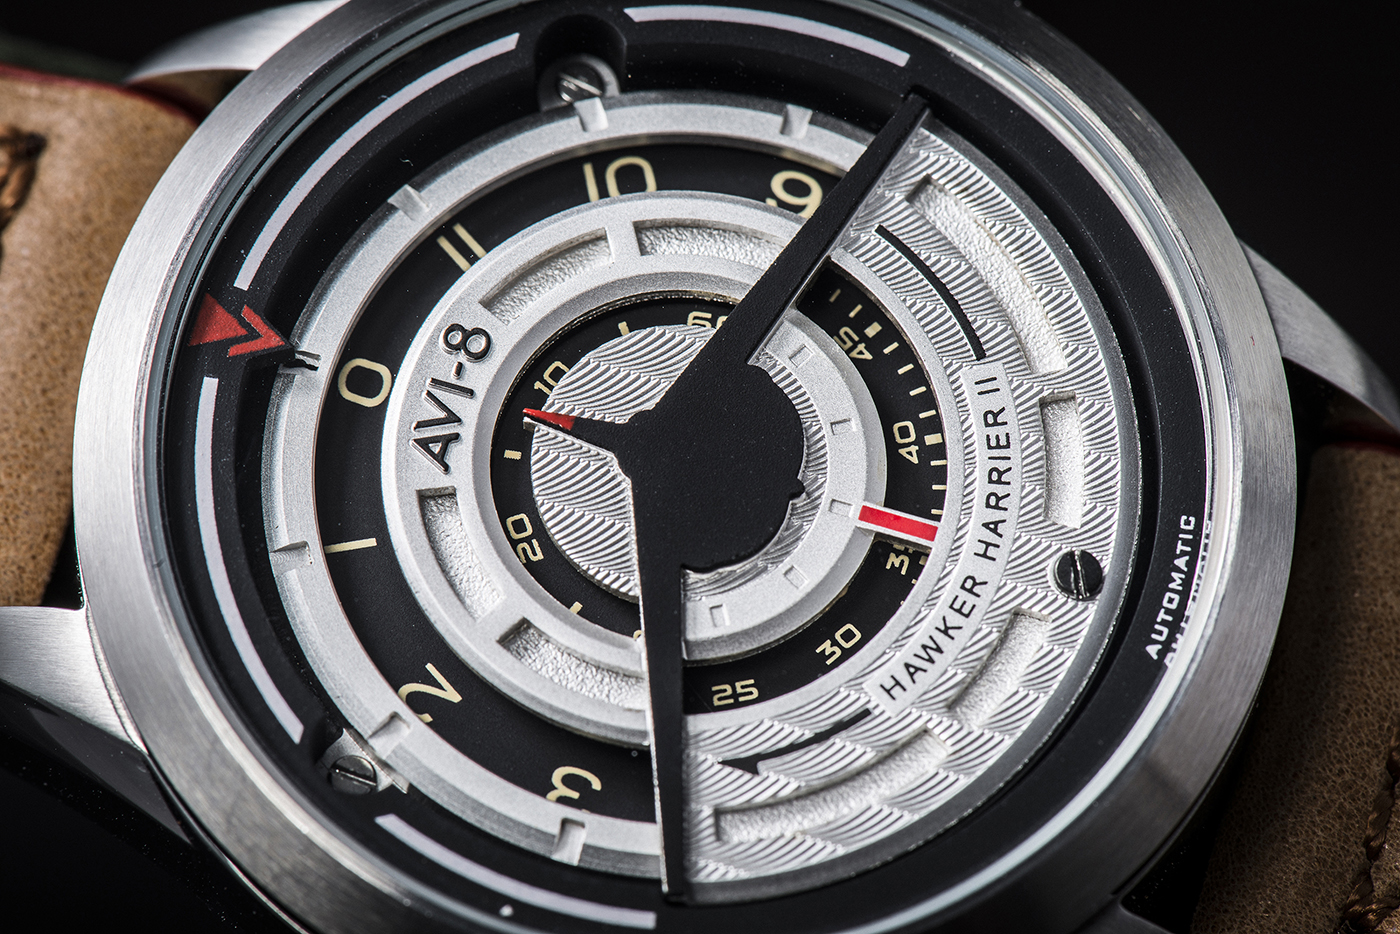 A close-up view of the watch dial clearly shows the Harrier silhouette in black on the front, and how it subtly indicates the time with the rotating discs displaying the hour, minute and second.